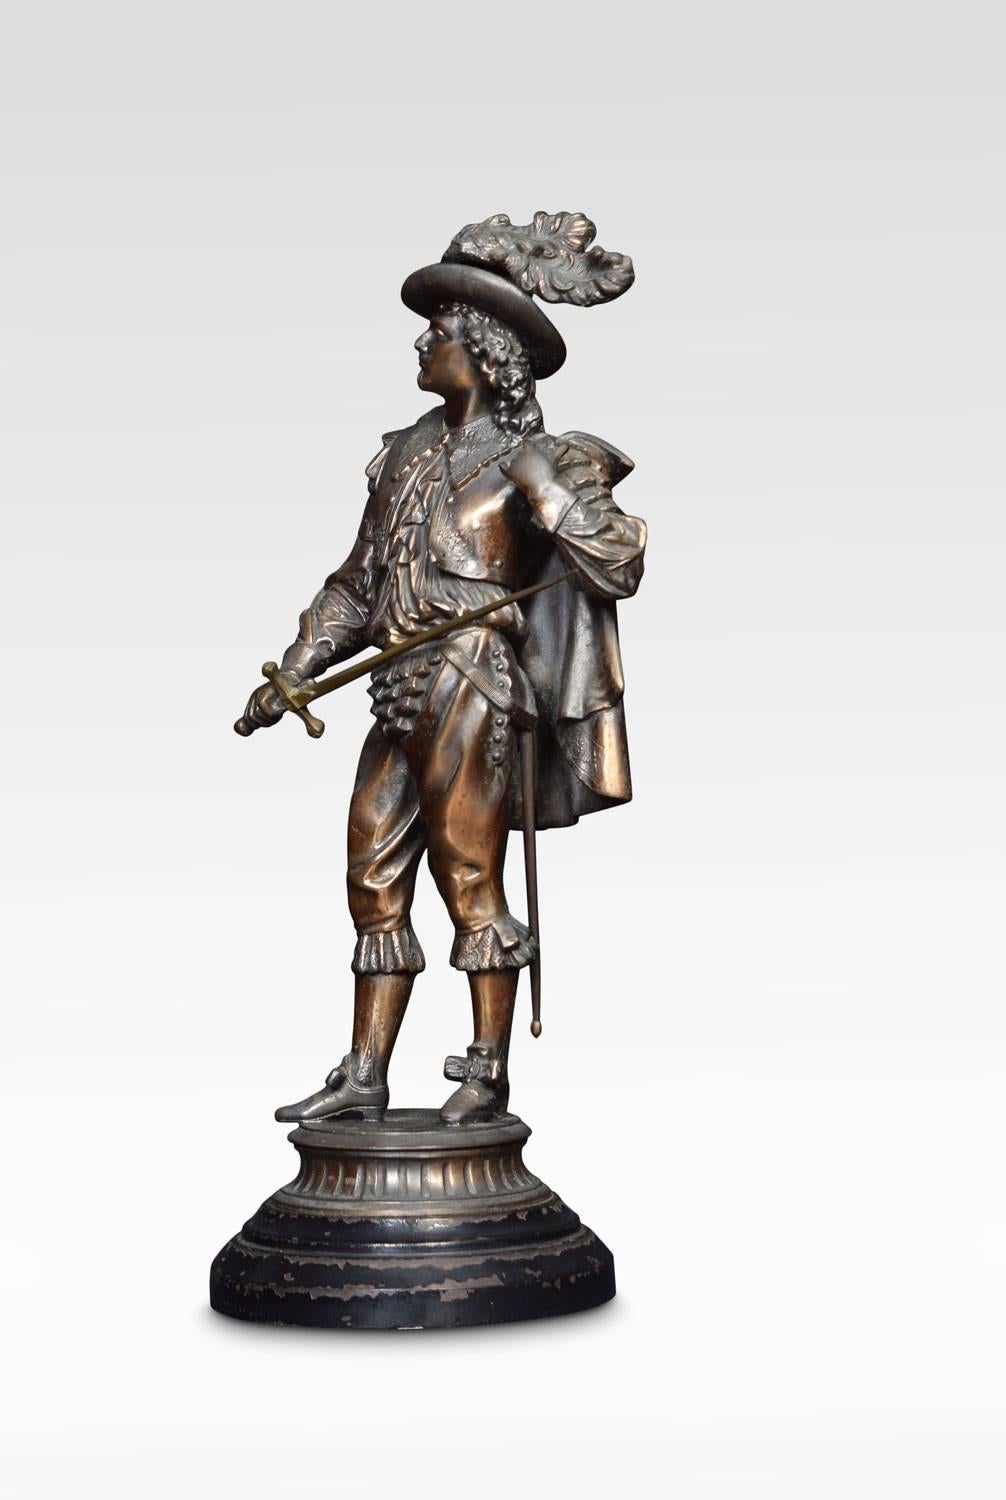 A 19th century bronzed figure of a cavalier in traditional dress, holding a sword. Raised up on circular ebonized base.
Dimensions:
Height 20.5 inches
Width 8 inches
Depth 8 inches.